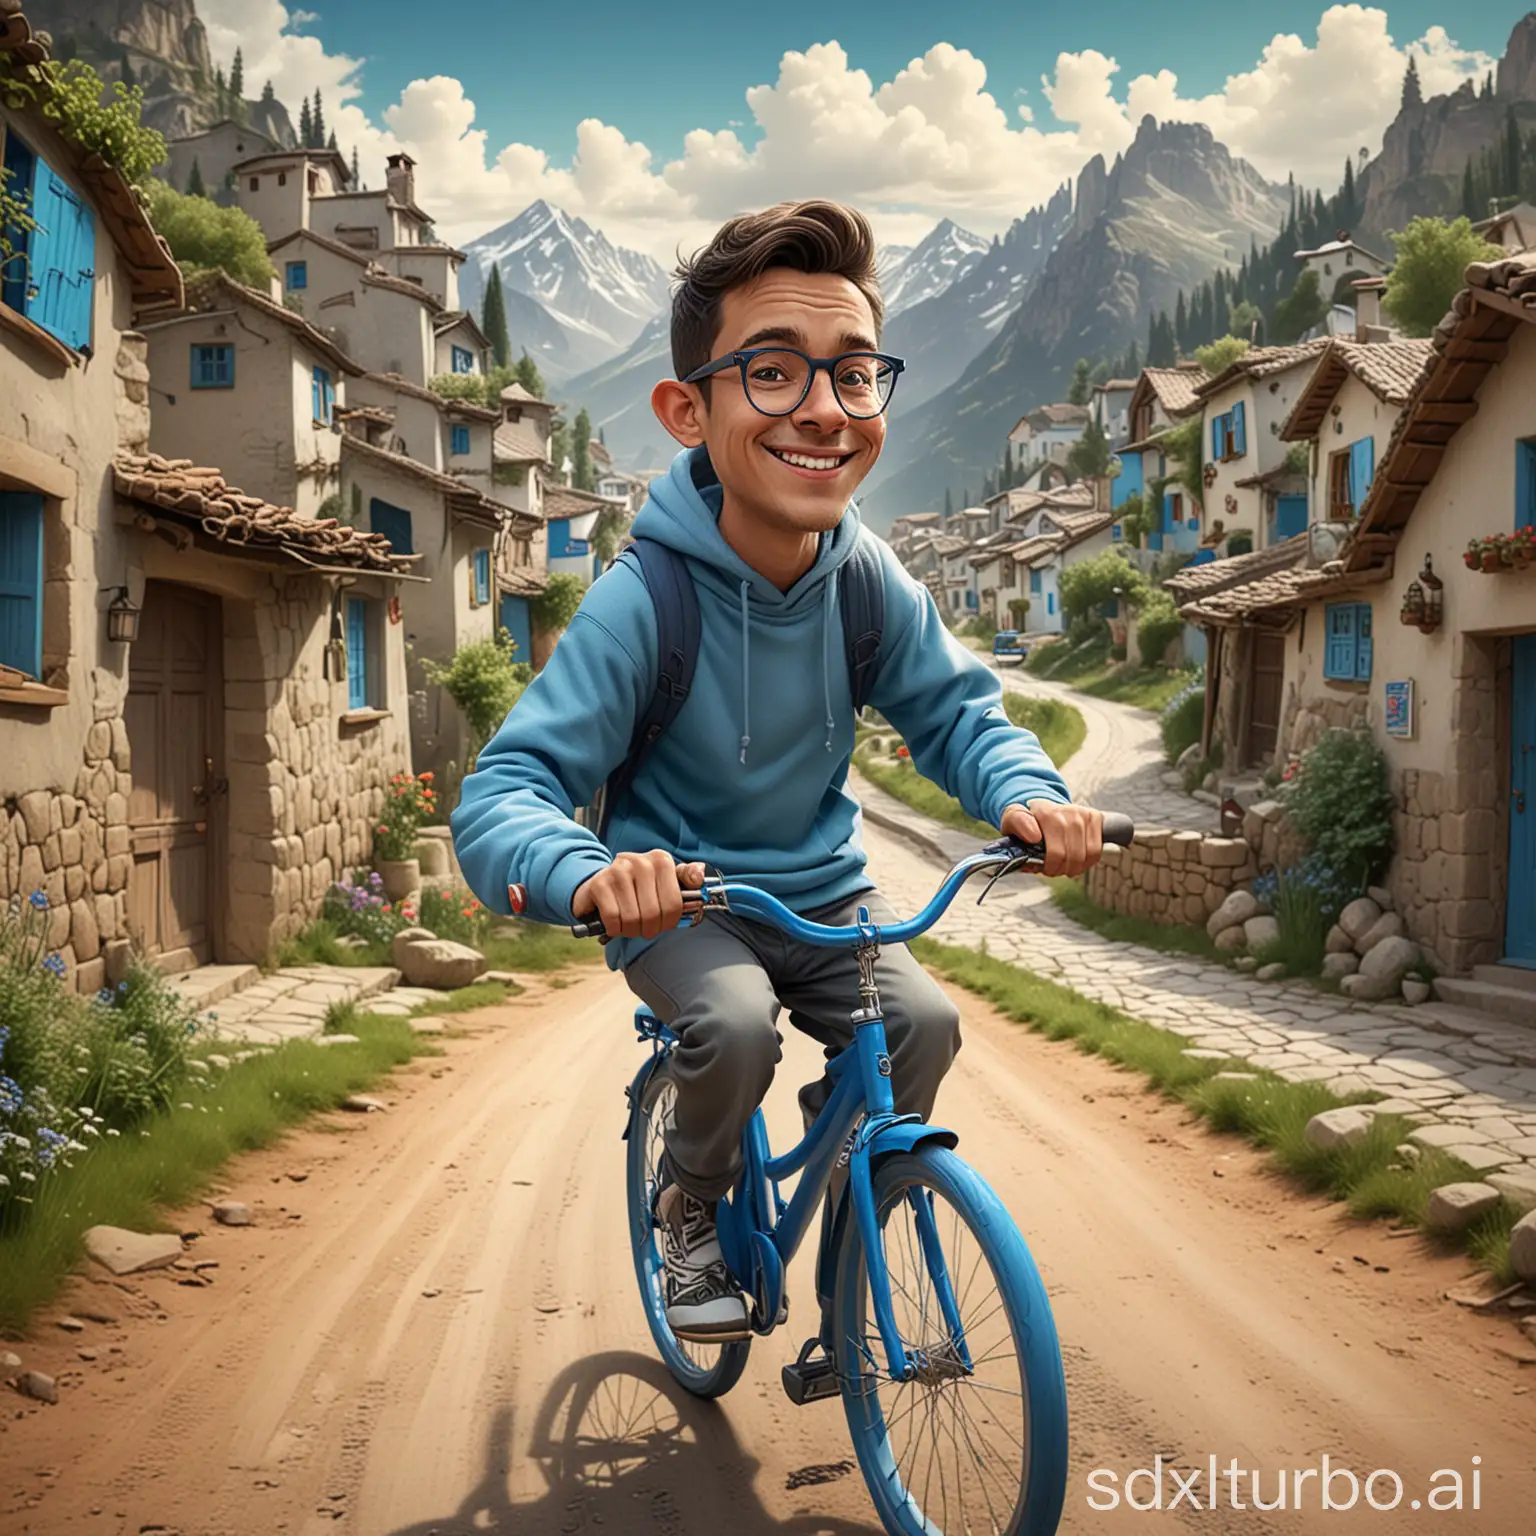 Caricature-Design-Young-Man-Riding-Blue-Bicycle-in-Mountainous-Village